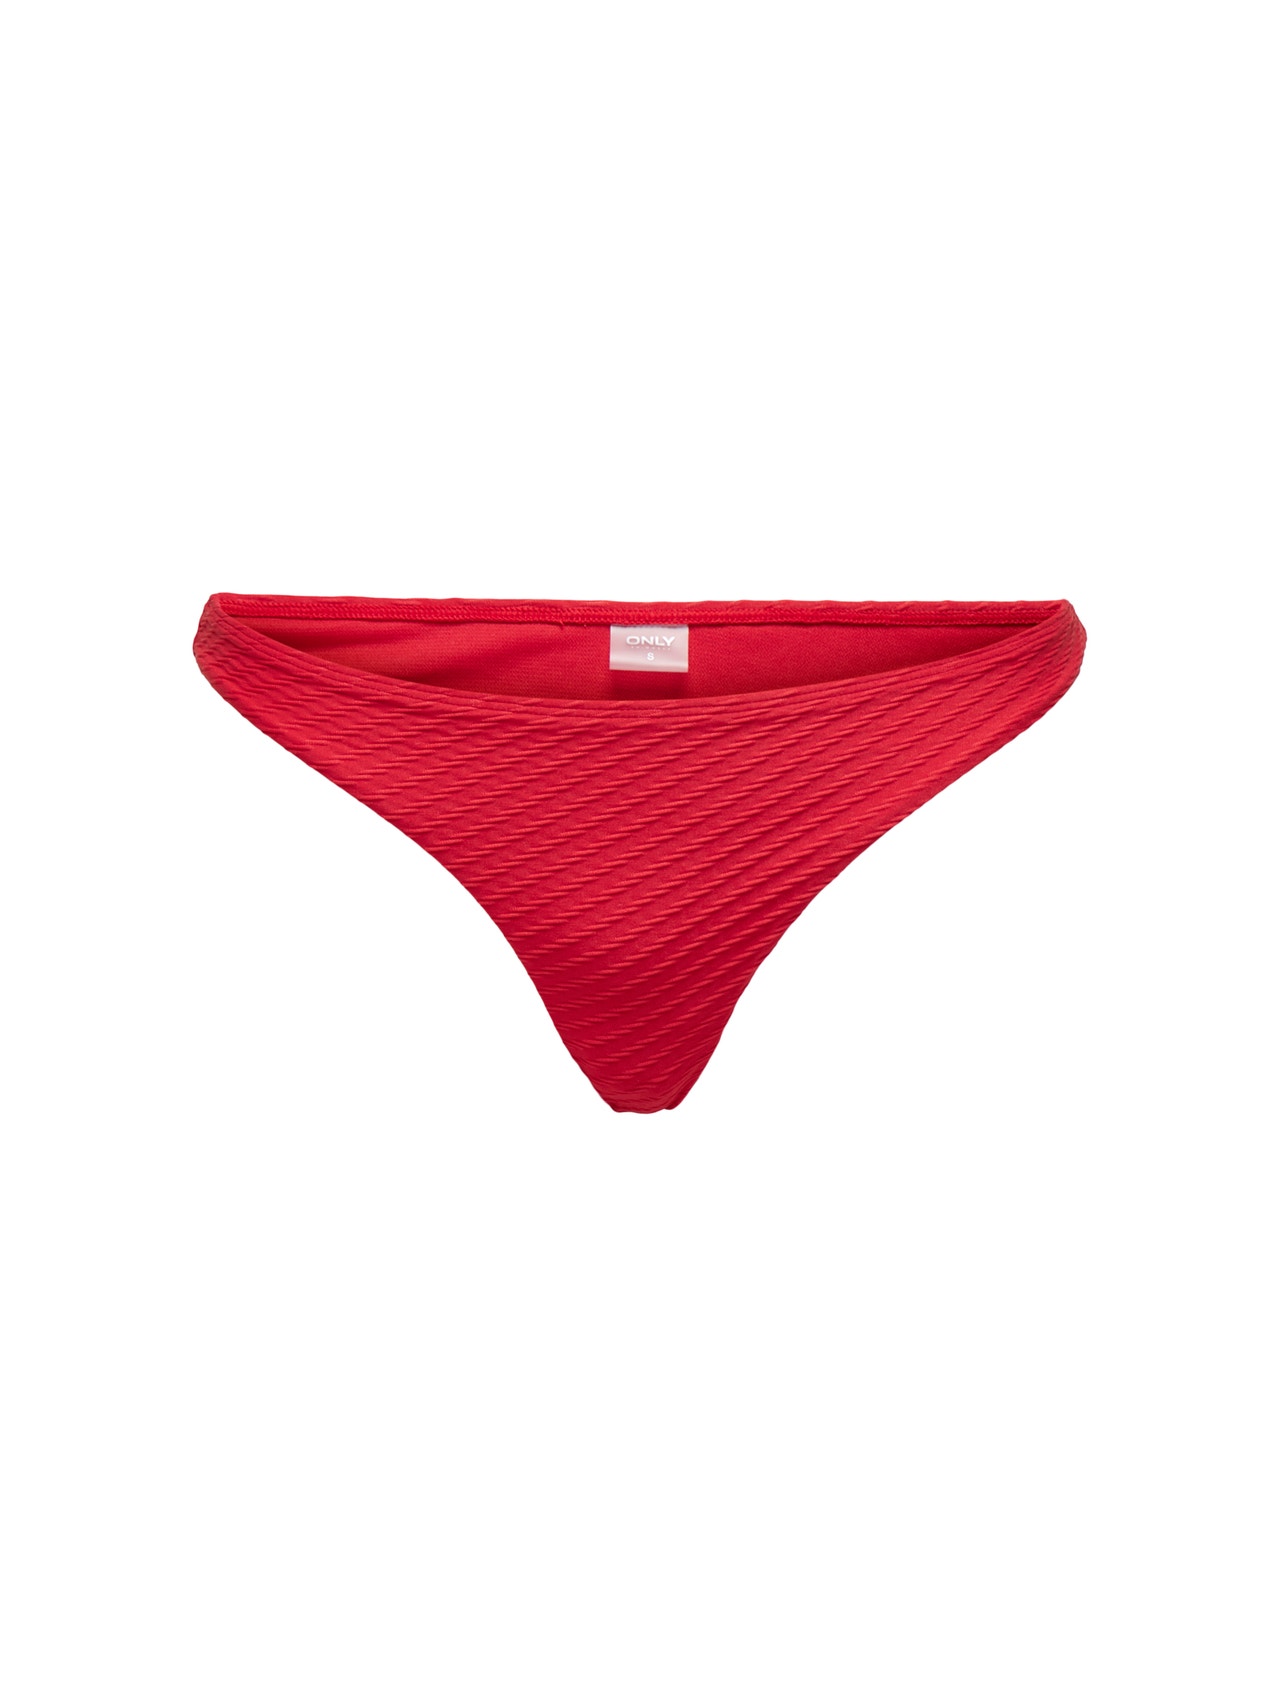 ONLY Structured Bikini pants -Mars Red - 15250849